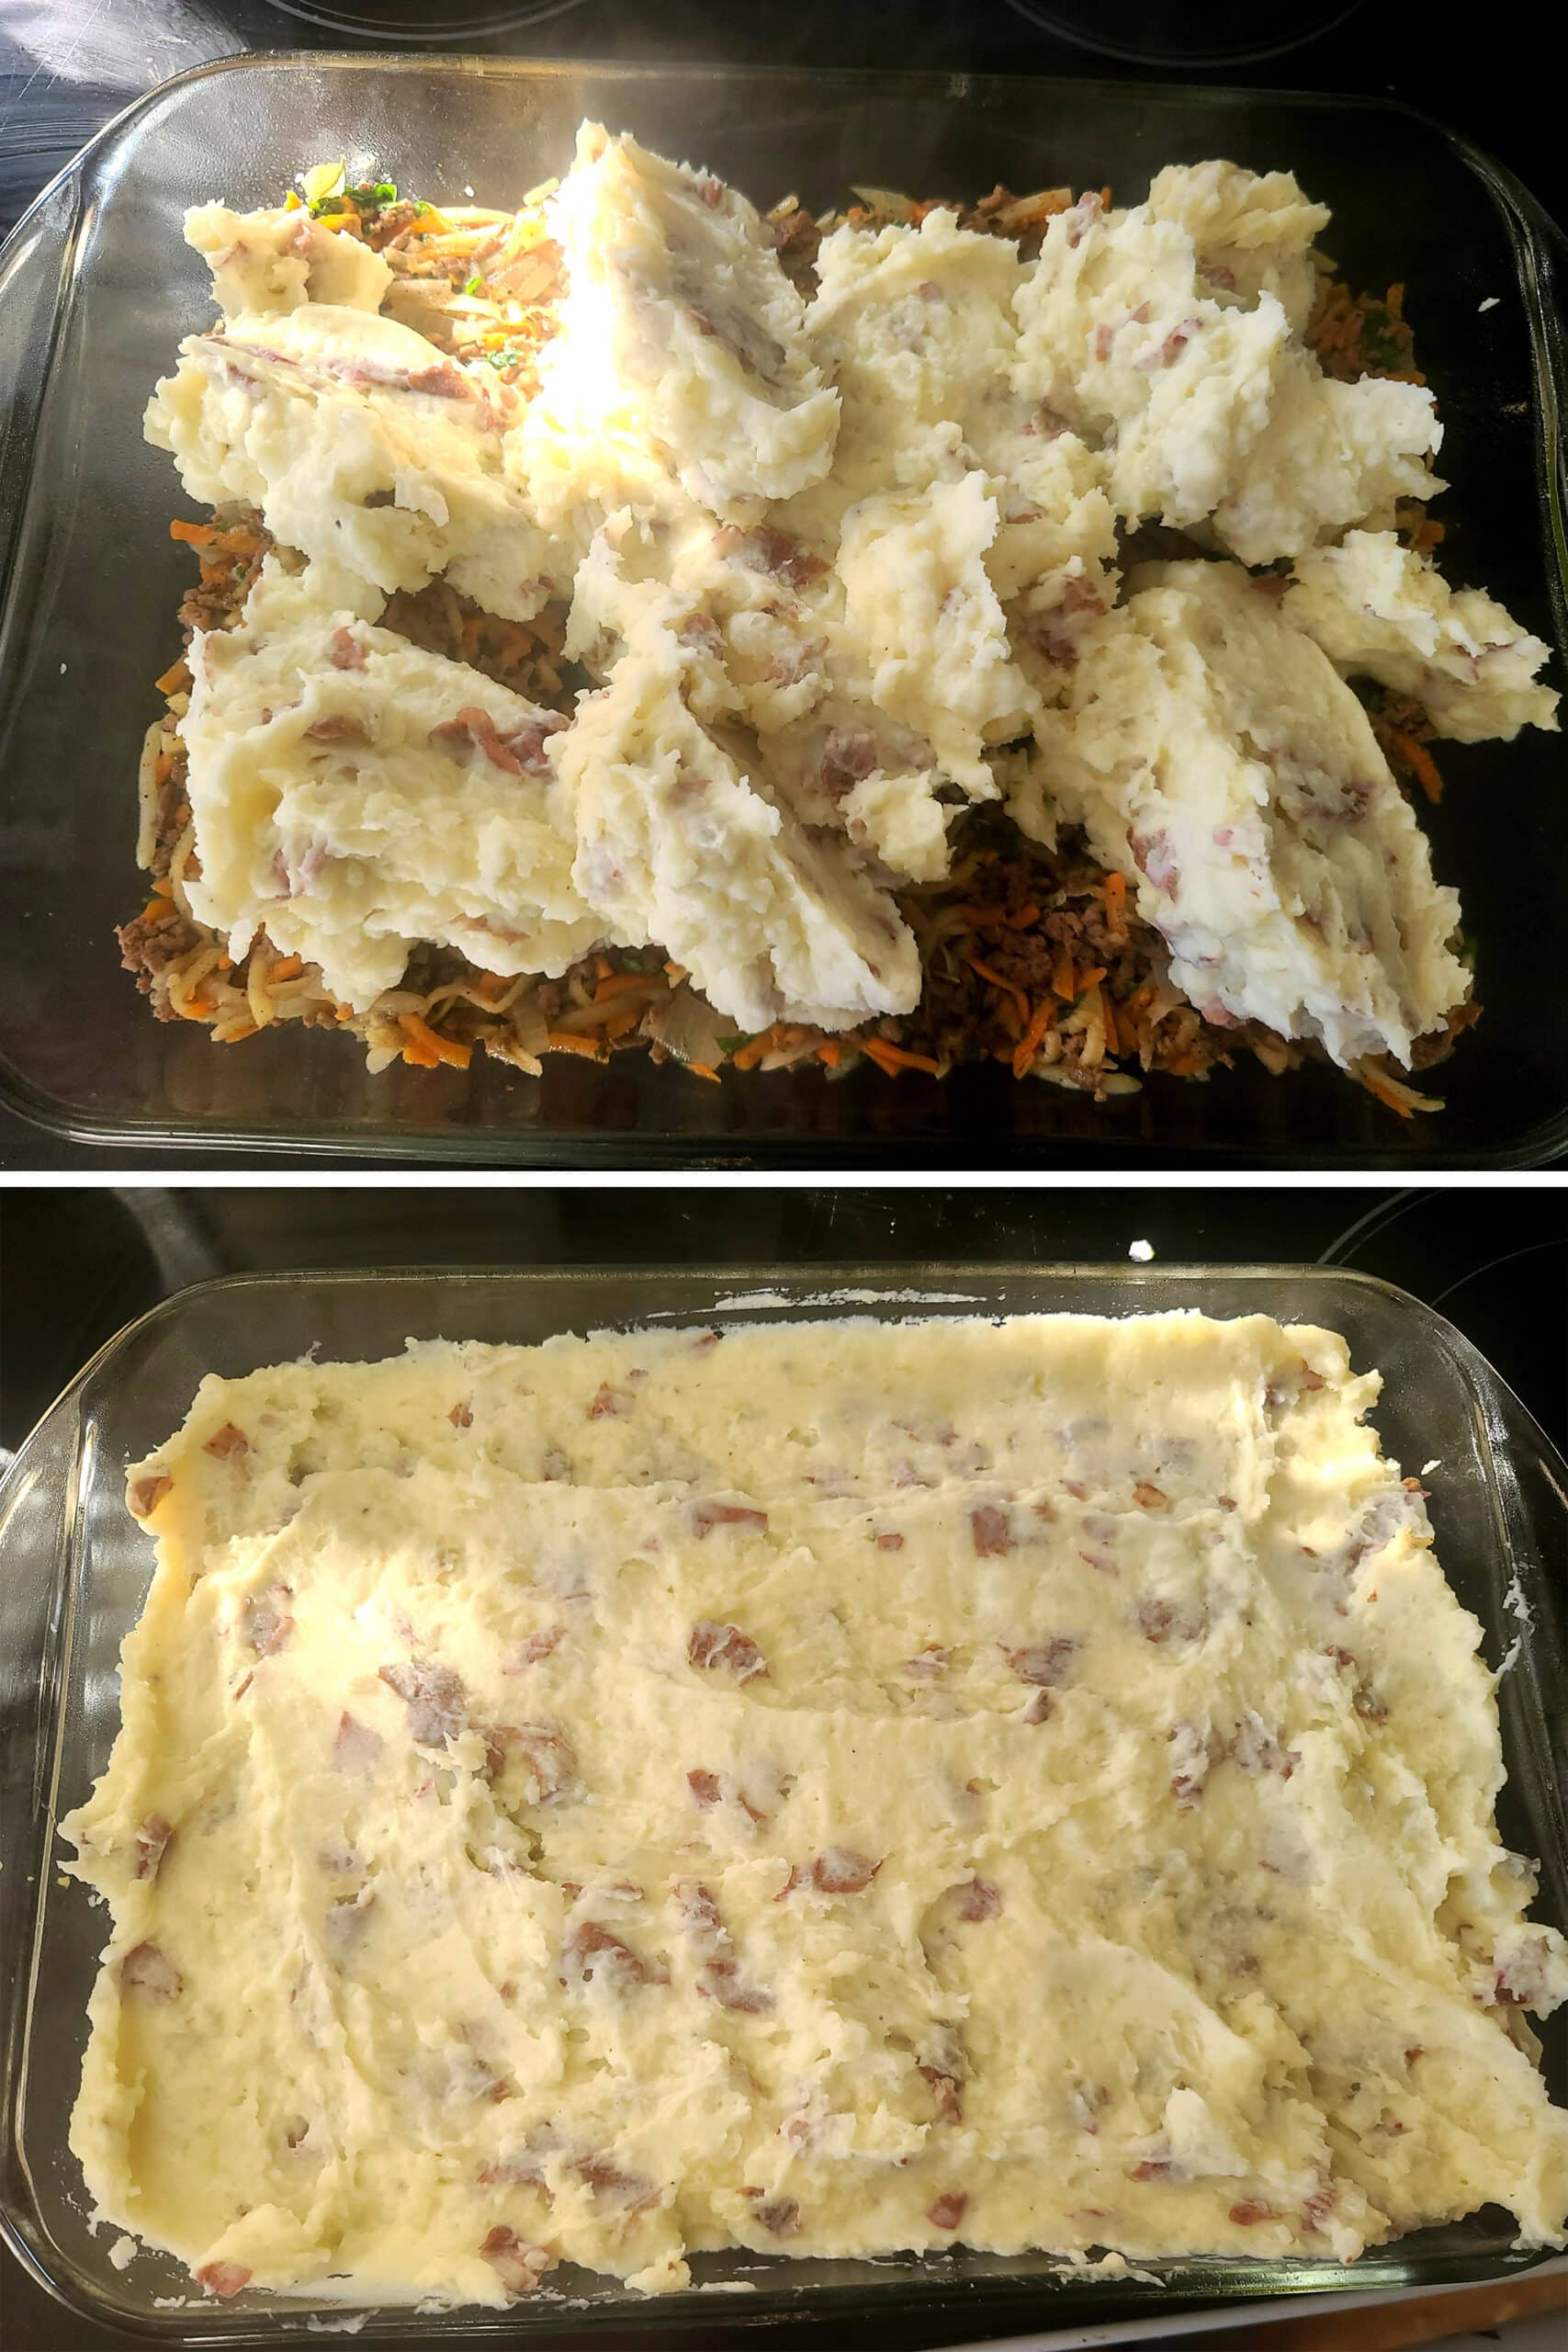 A 2 part image showing the mashed potatoes being spooned on top of the meat mixture and spread to cover it.